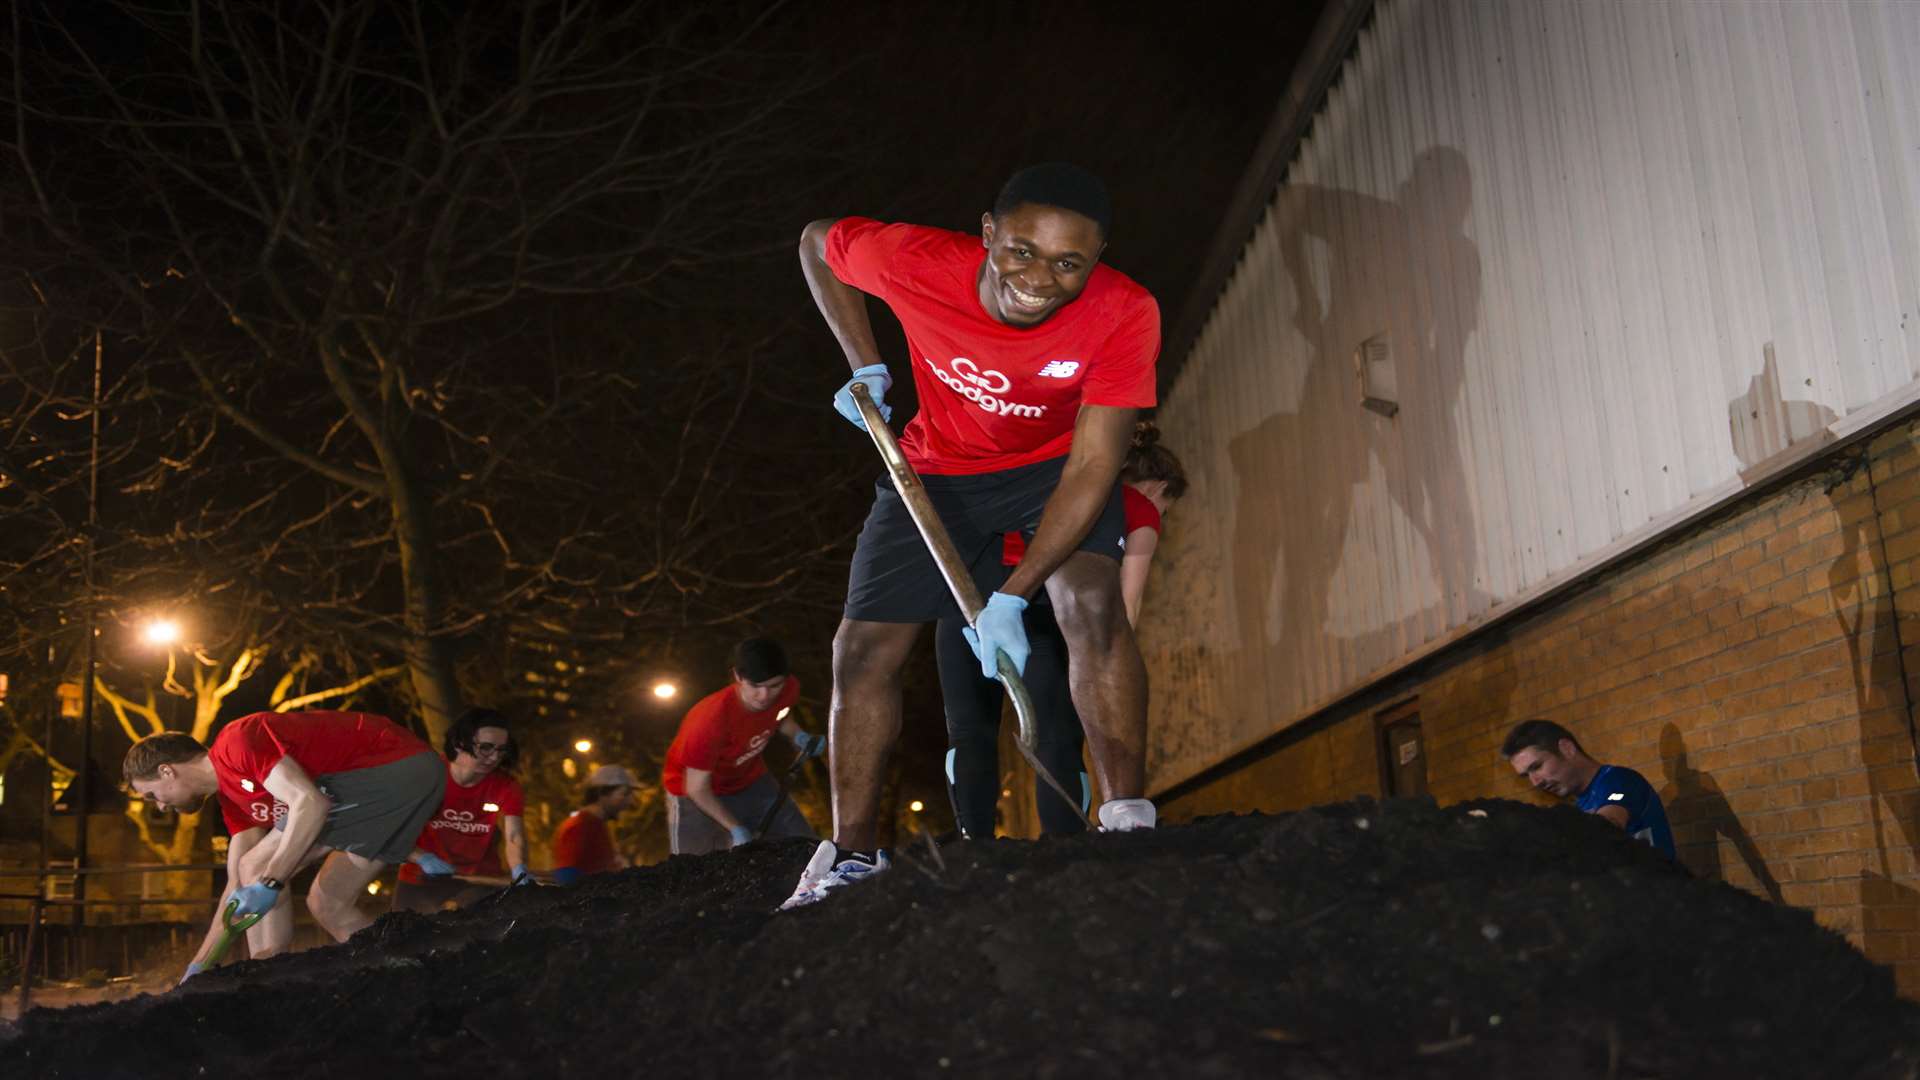 GoodGym aims to pair people wanting to get fit with community projects